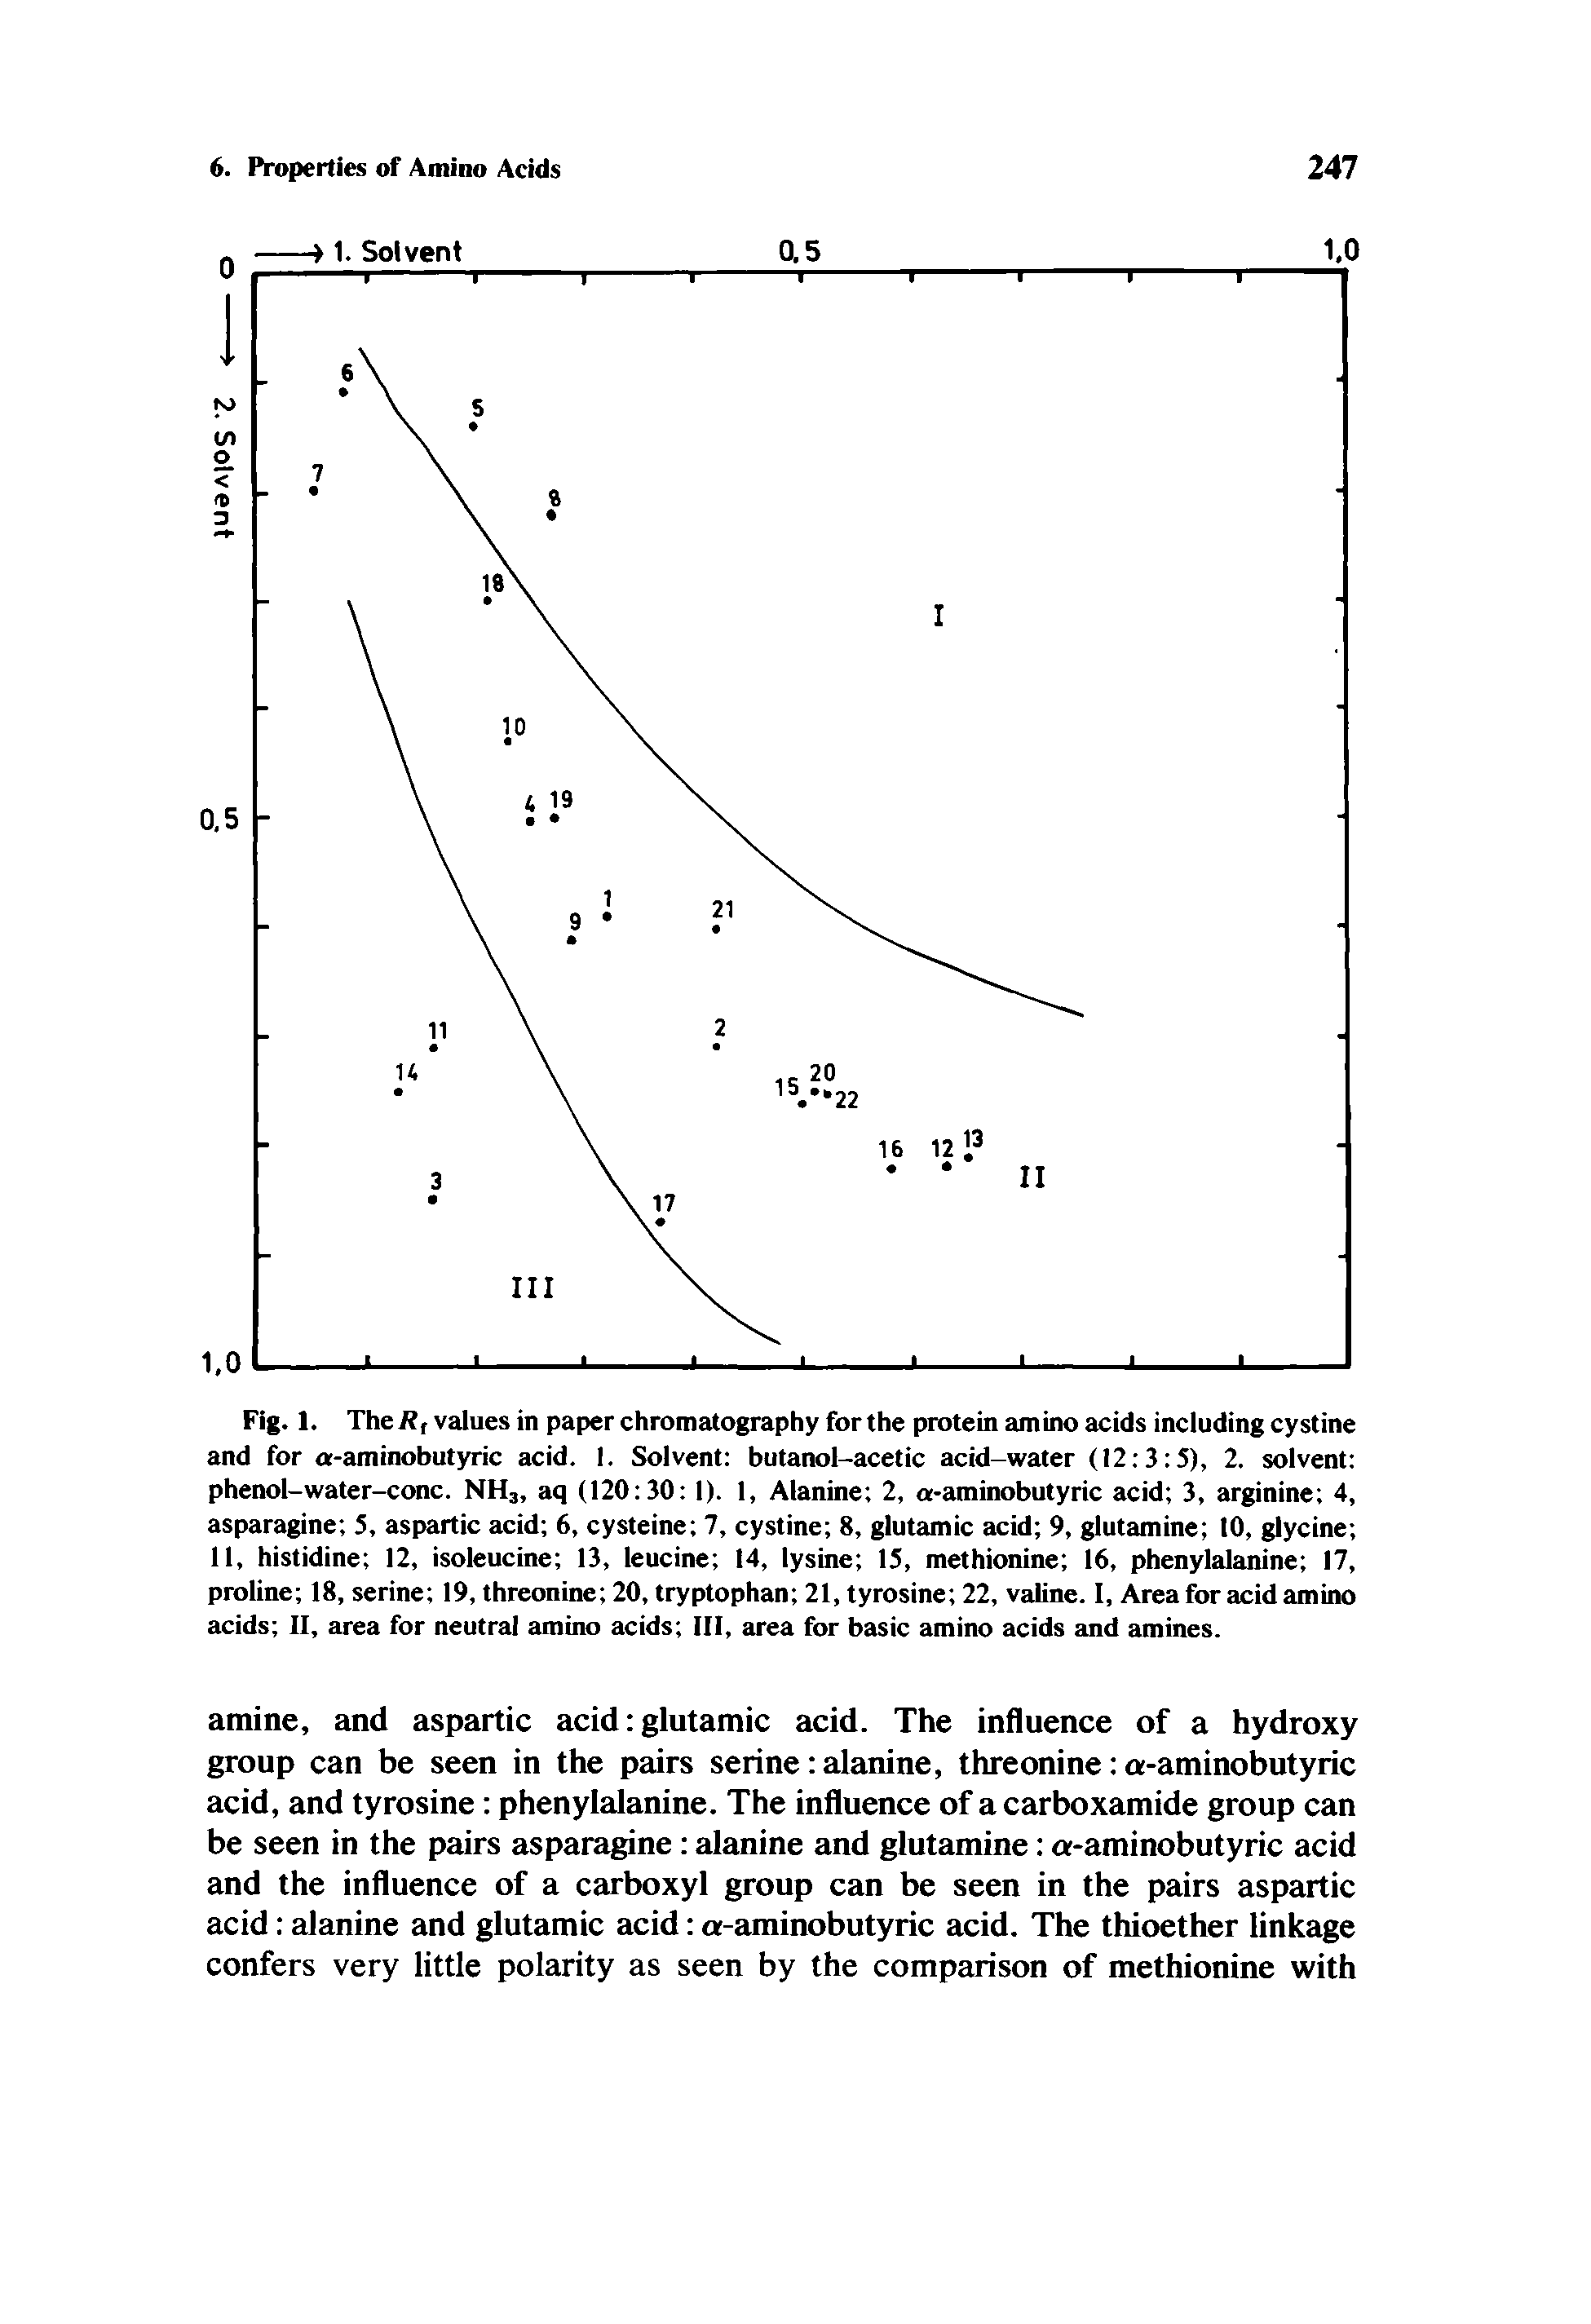 Fig. 1. The R, values in paper chromatography for the protein amino acids including cystine and for a-aminobutyric acid. I. Solvent butanol-acetic acid-water (12 3 5), 2. solvent phenol-water-conc. NH, aq (120 30 1). I, Alanine 2, a-aminobutyric acid 3, arginine 4, asparagine 5. aspartic acid 6, cysteine 7, cystine 8, glutamic acid 9, glutamine 10, glycine II, histidine 12, isoleucine 13, leucine 14, lysine 15, methionine 16, phenylalanine 17, proline 18, serine 19, threonine 20, tryptophan 21, tyrosine 22, valine. I, Area for acid amino acids II, area for neutral amino acids III, area for basic amino acids and amines.